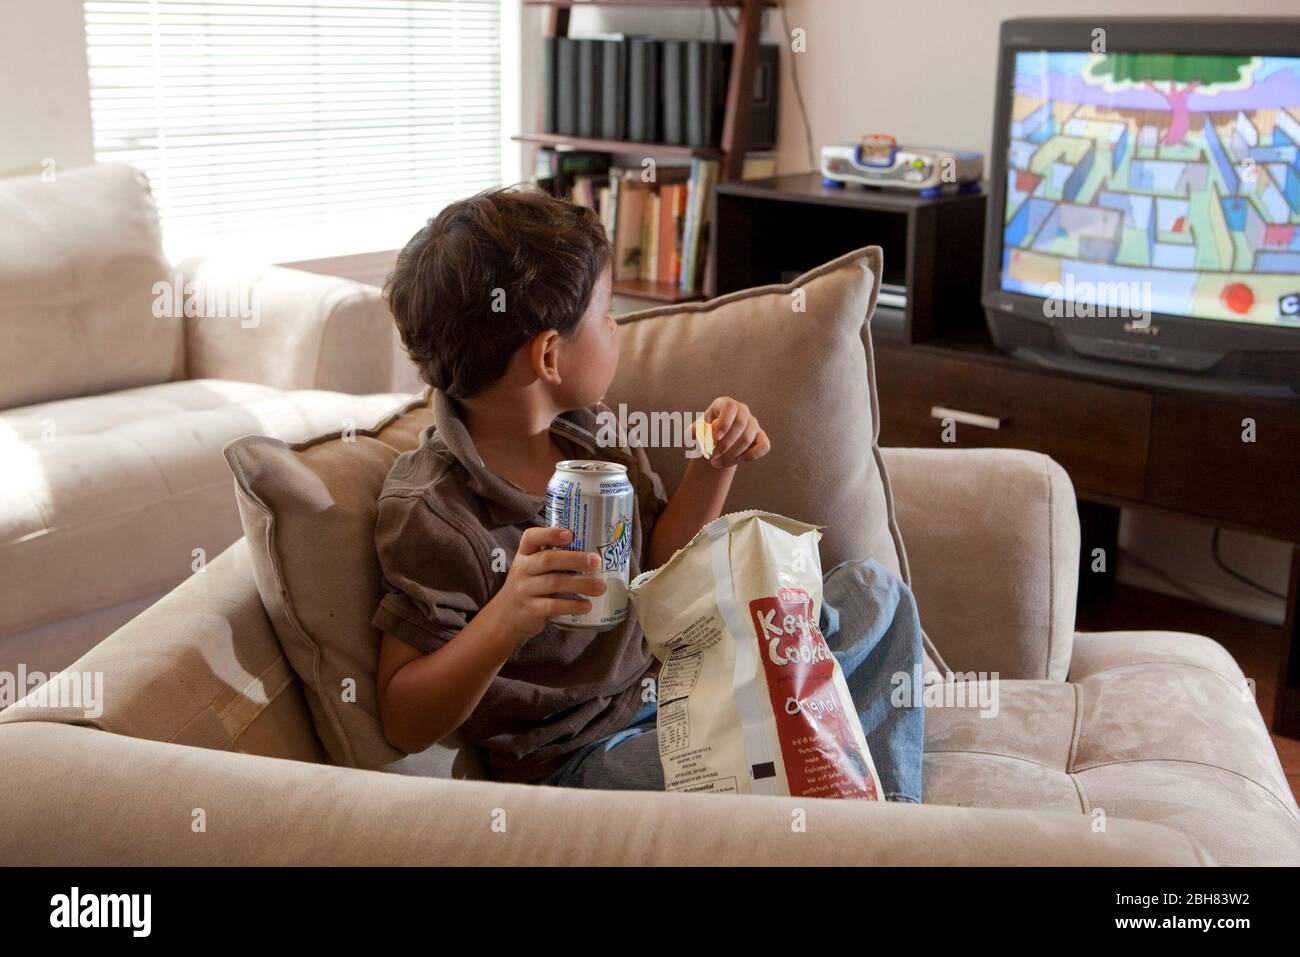 Austin, Texas  August 22, 2009:  Mexican-American boy eating potato chips, drinking a soft drink and watching the Cartoon Network  while sitting in an over-stuffed chair at home on a Saturday morning.  MR ©Bob Daemmrich Stock Photo